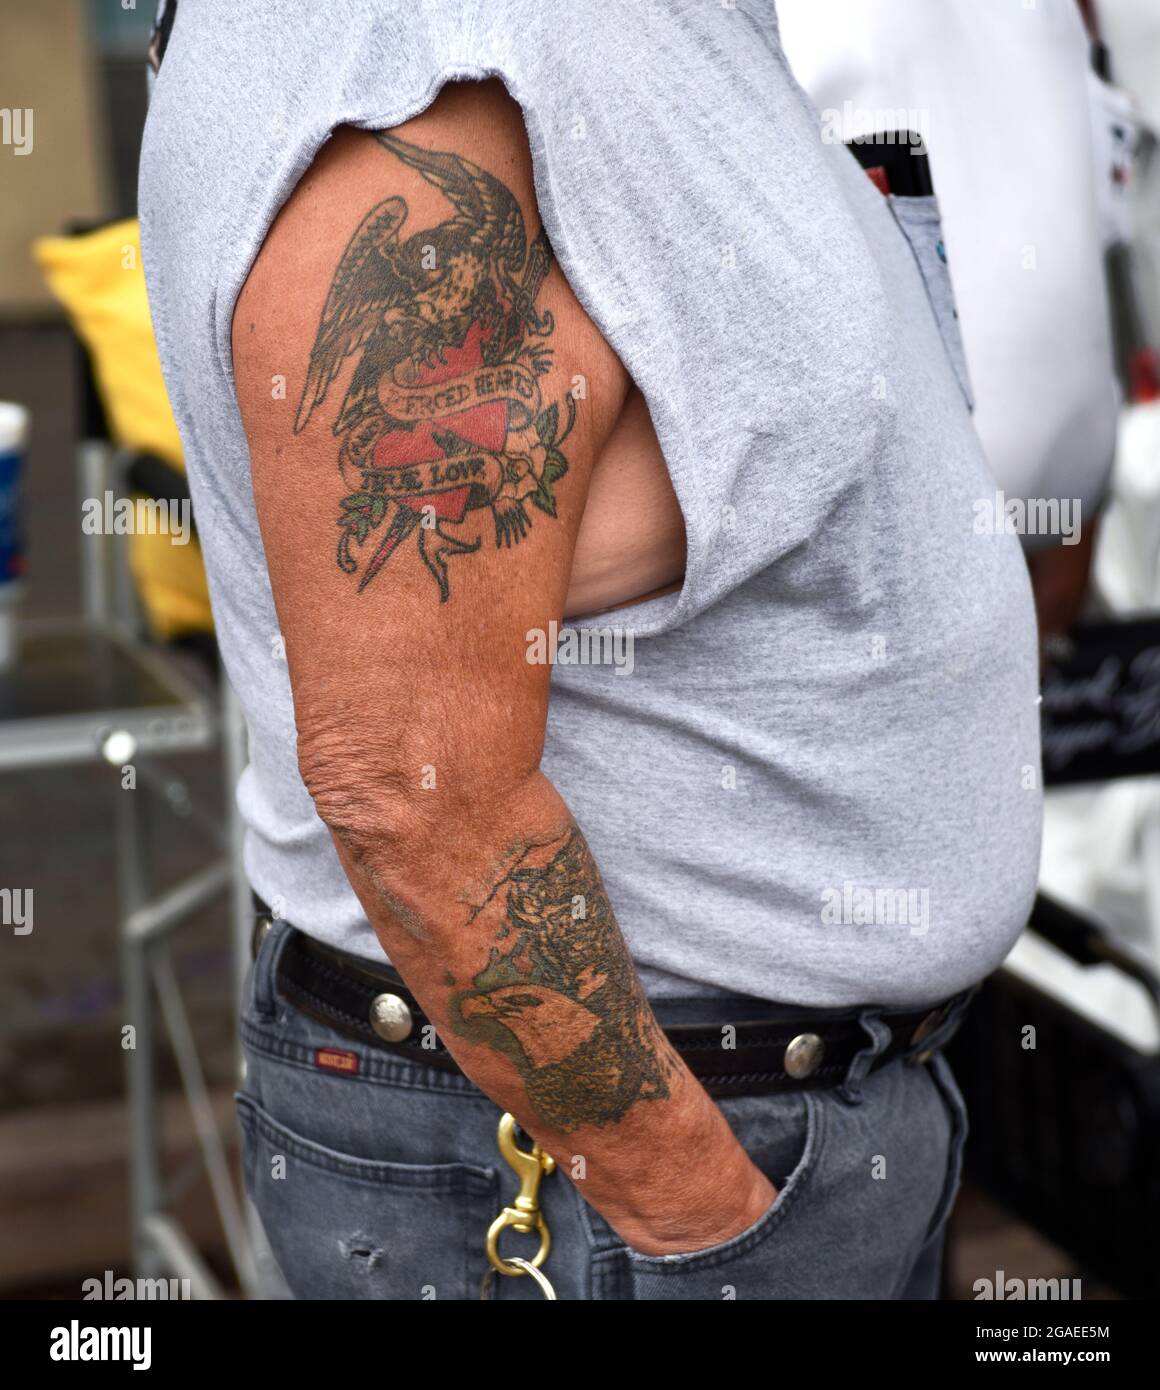 A man with tattoos on his arm visits an outdoor art show in Santa Fe, New Mexico. Stock Photo